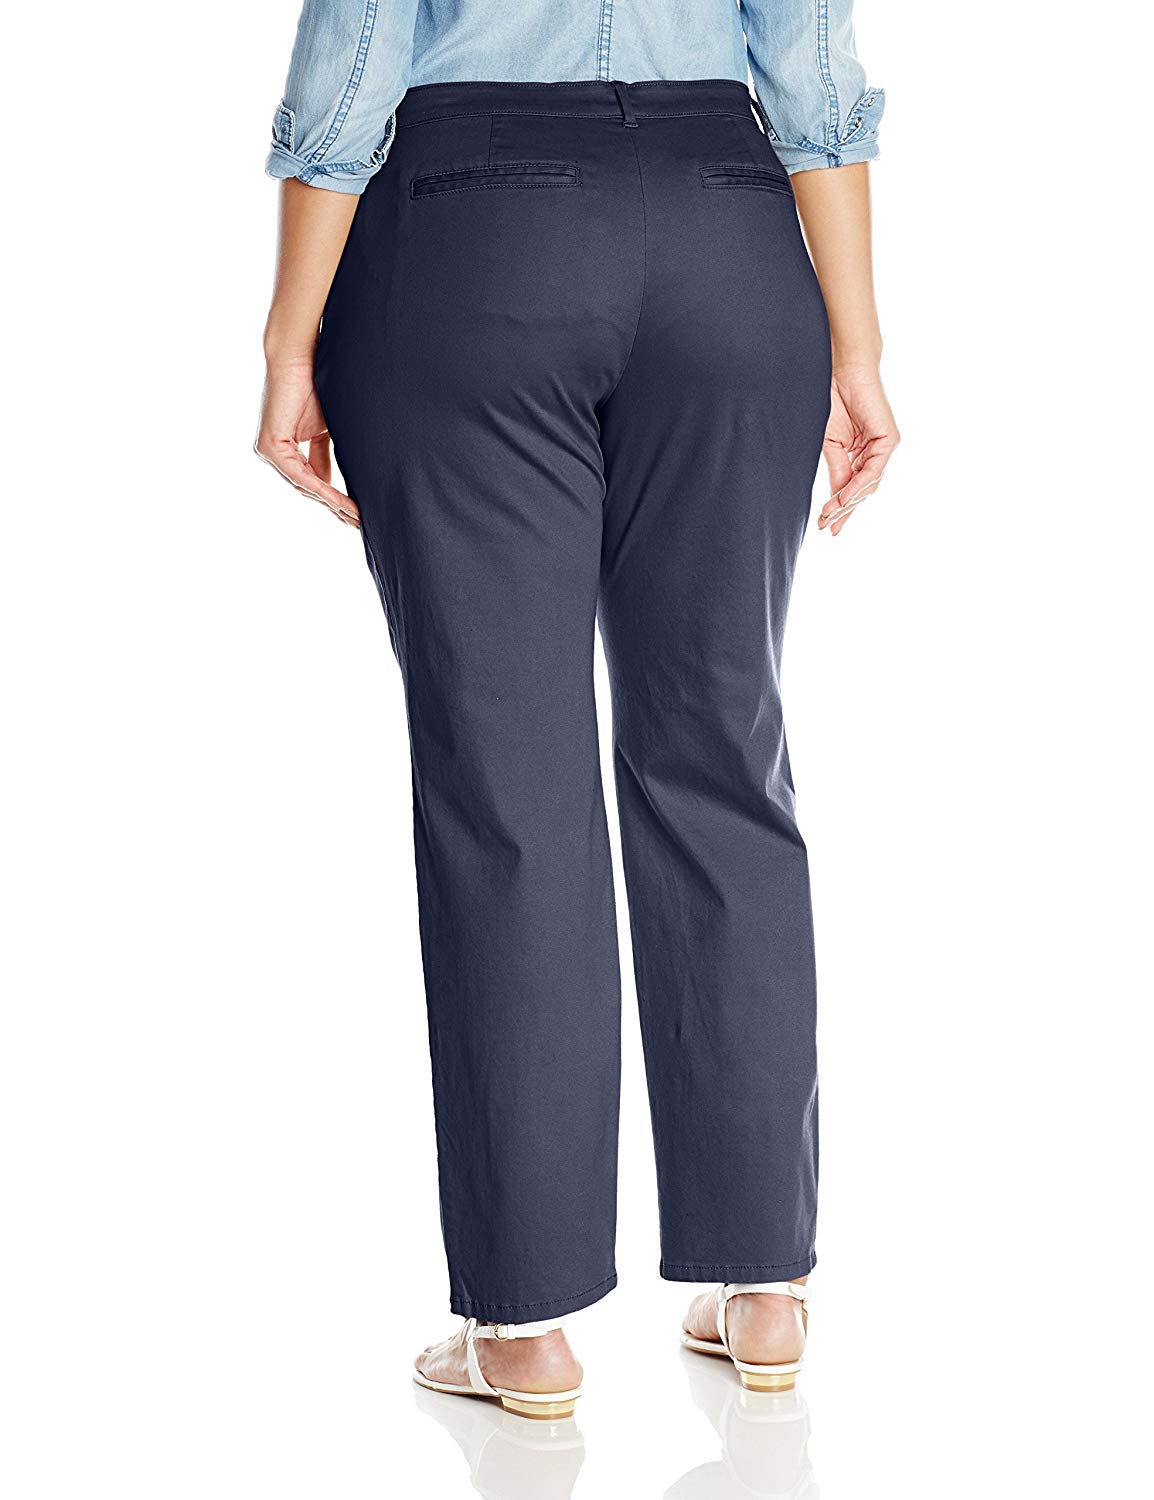 Lee Women's Plus-Size Relaxed-Fit All Day Pant,, Imperial Blue, Size 18 ...